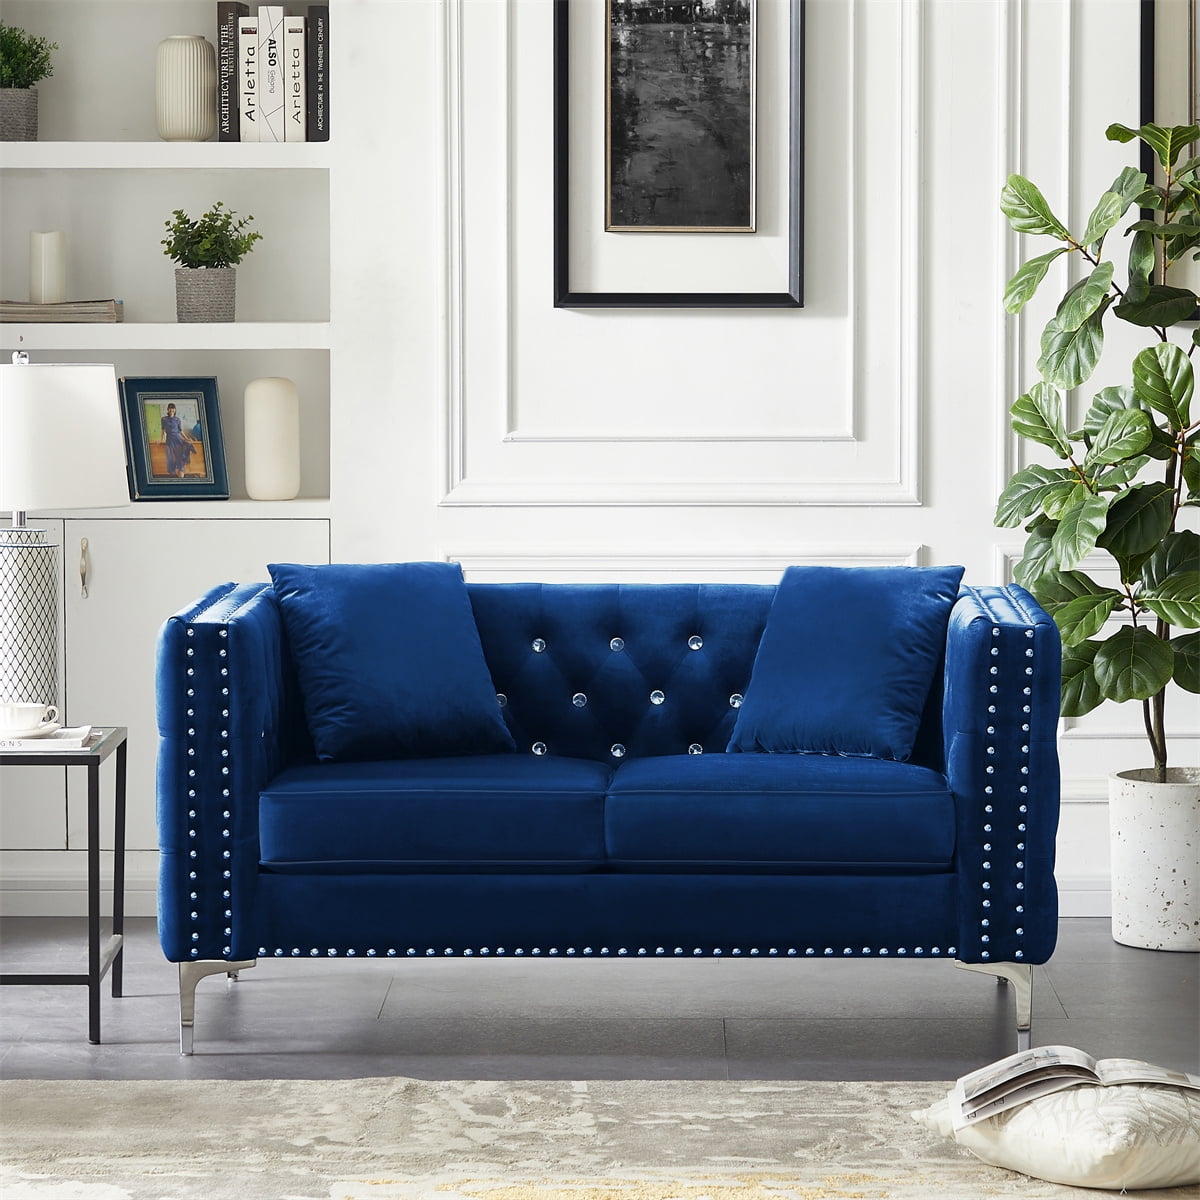 75 Gray Living Room with Blue Walls Ideas You'll Love - October, 2023 |  Houzz